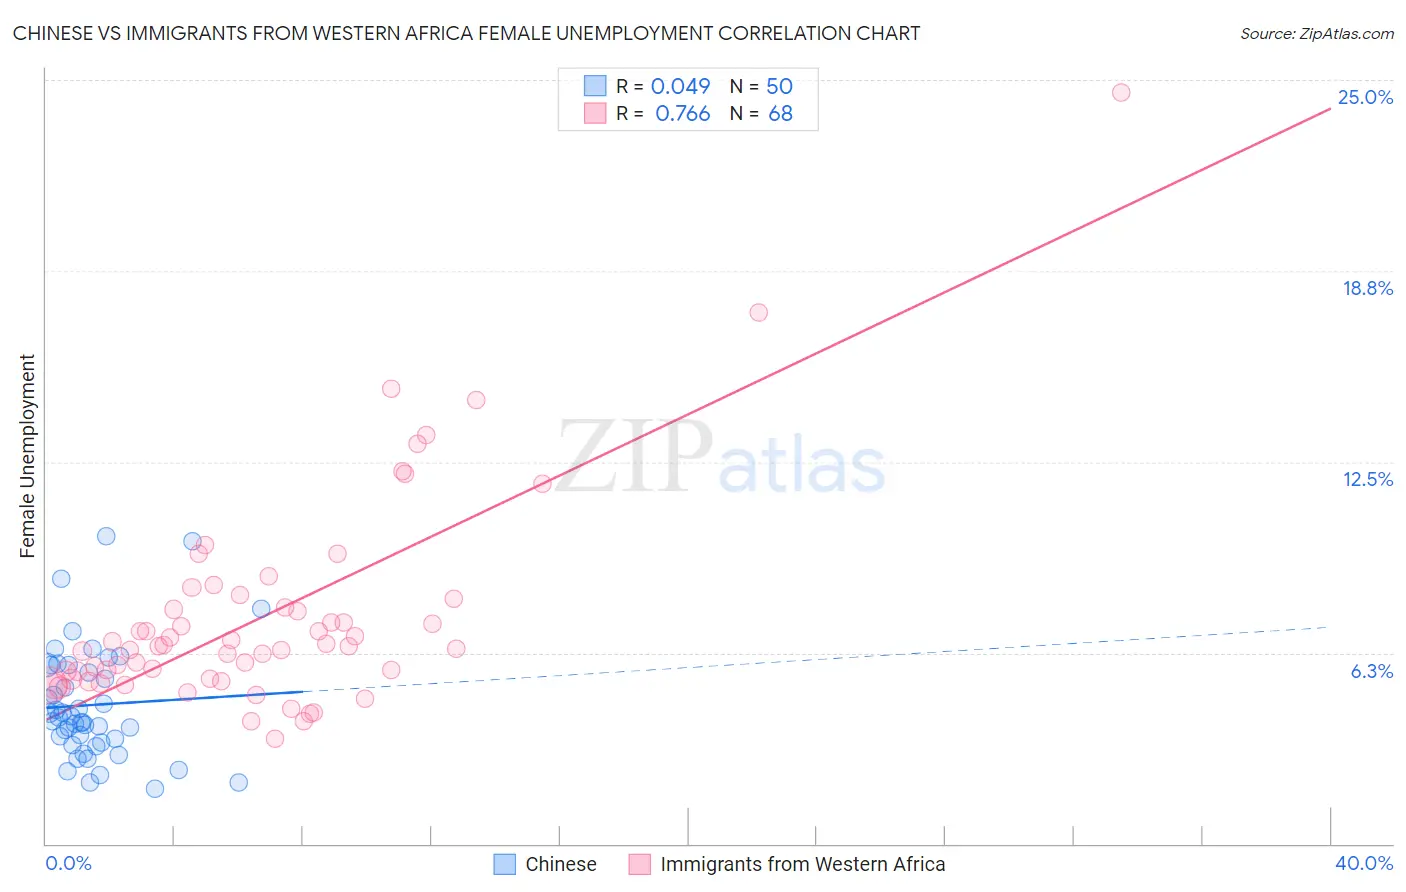 Chinese vs Immigrants from Western Africa Female Unemployment